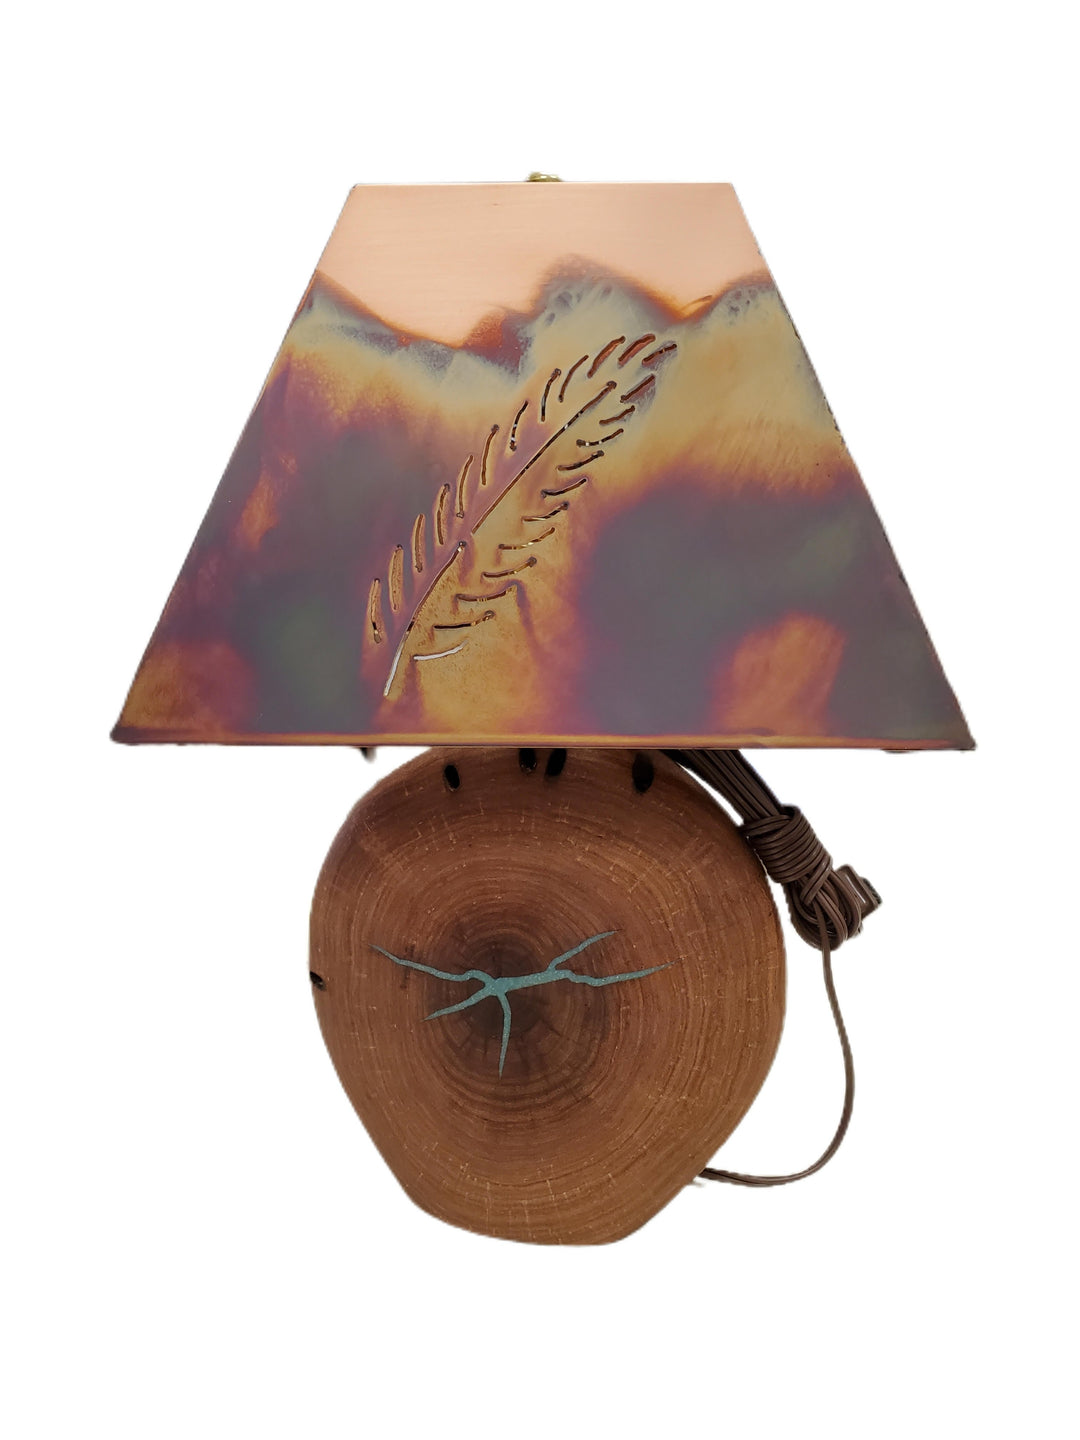 Turquoise Inlaid Mesquite Lamps Feather: Small-#1 Ranked New Mexico Salsa &amp; Chile Powder | Made in New Mexico